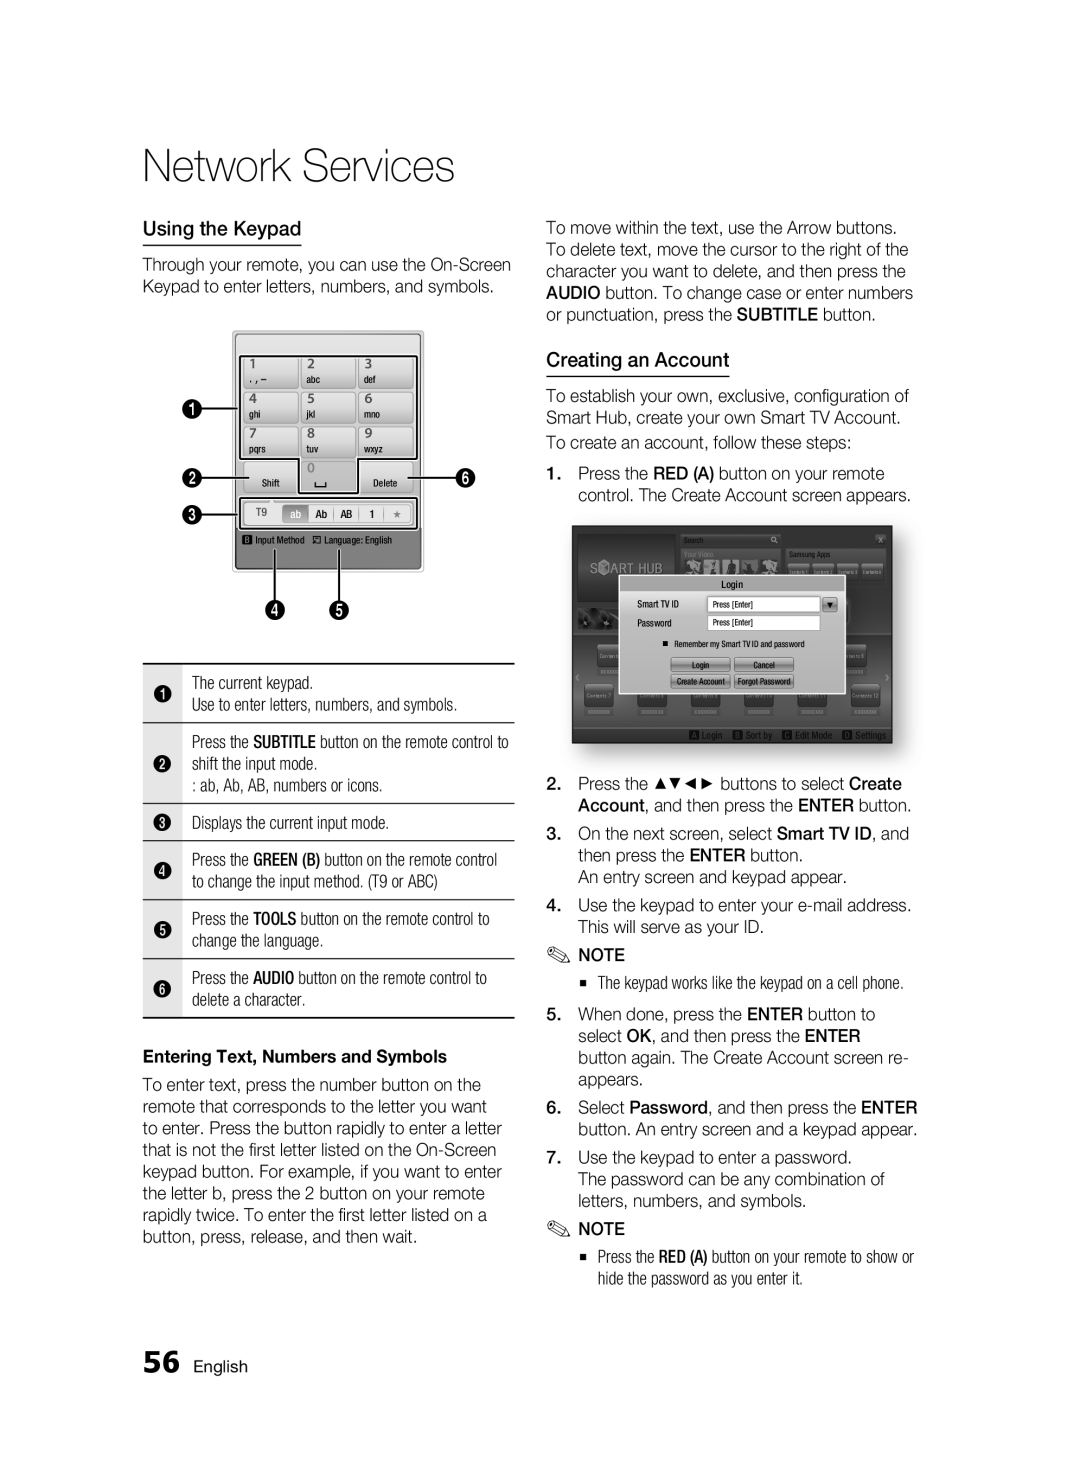 Samsung BD-D6500 user manual Network Services, Using the Keypad, Creating an Account, Entering Text, Numbers and Symbols 